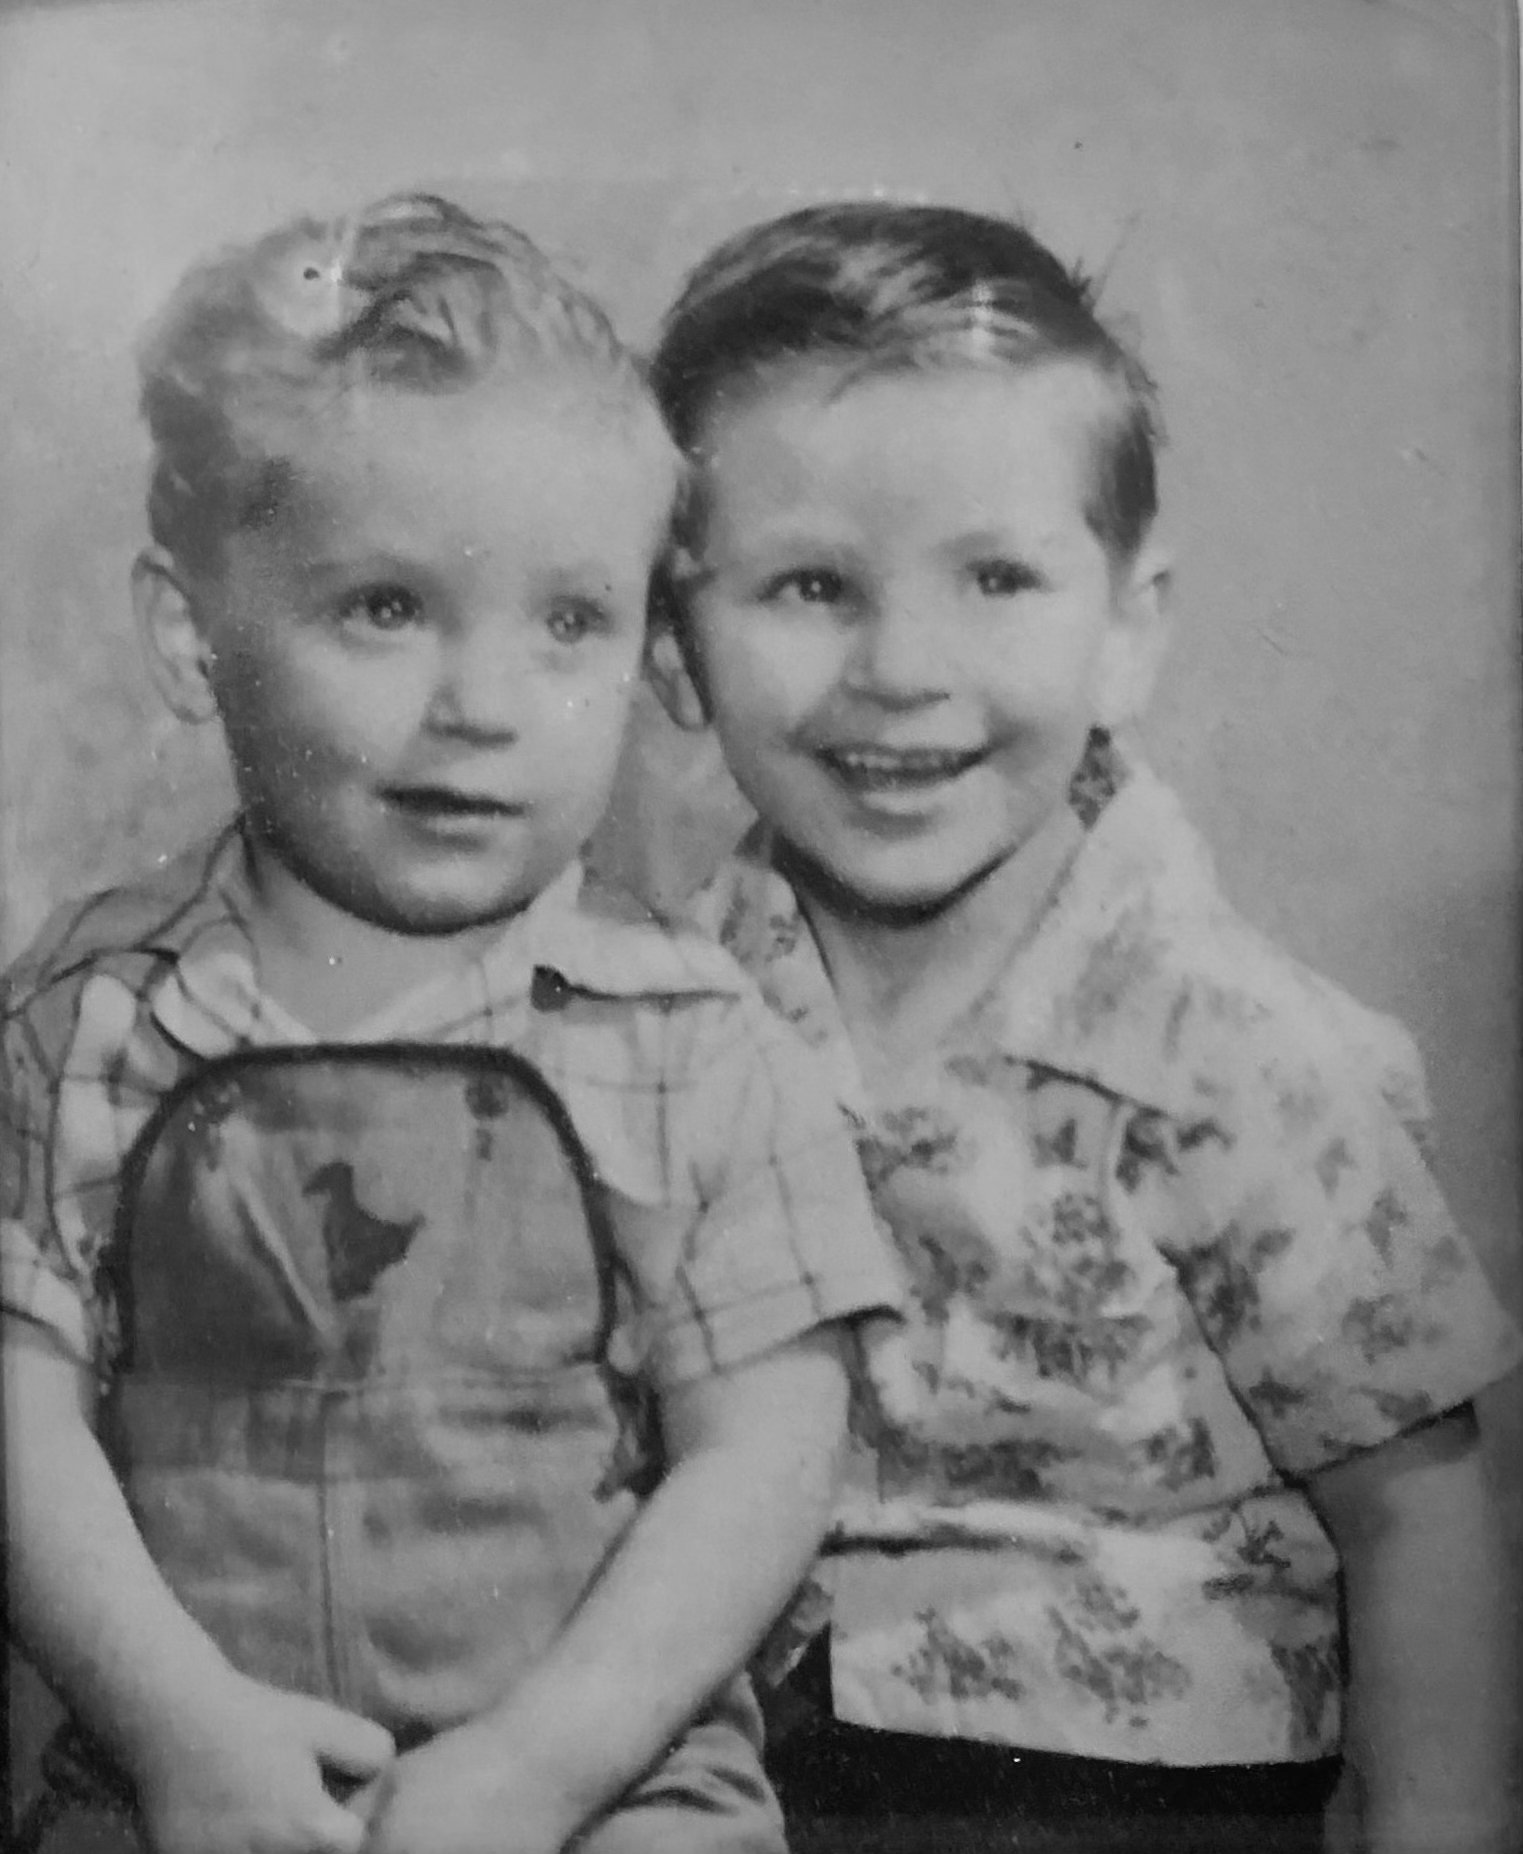  Darrel, 2 years old, and his 4 year old brother, Jim. 1951. 